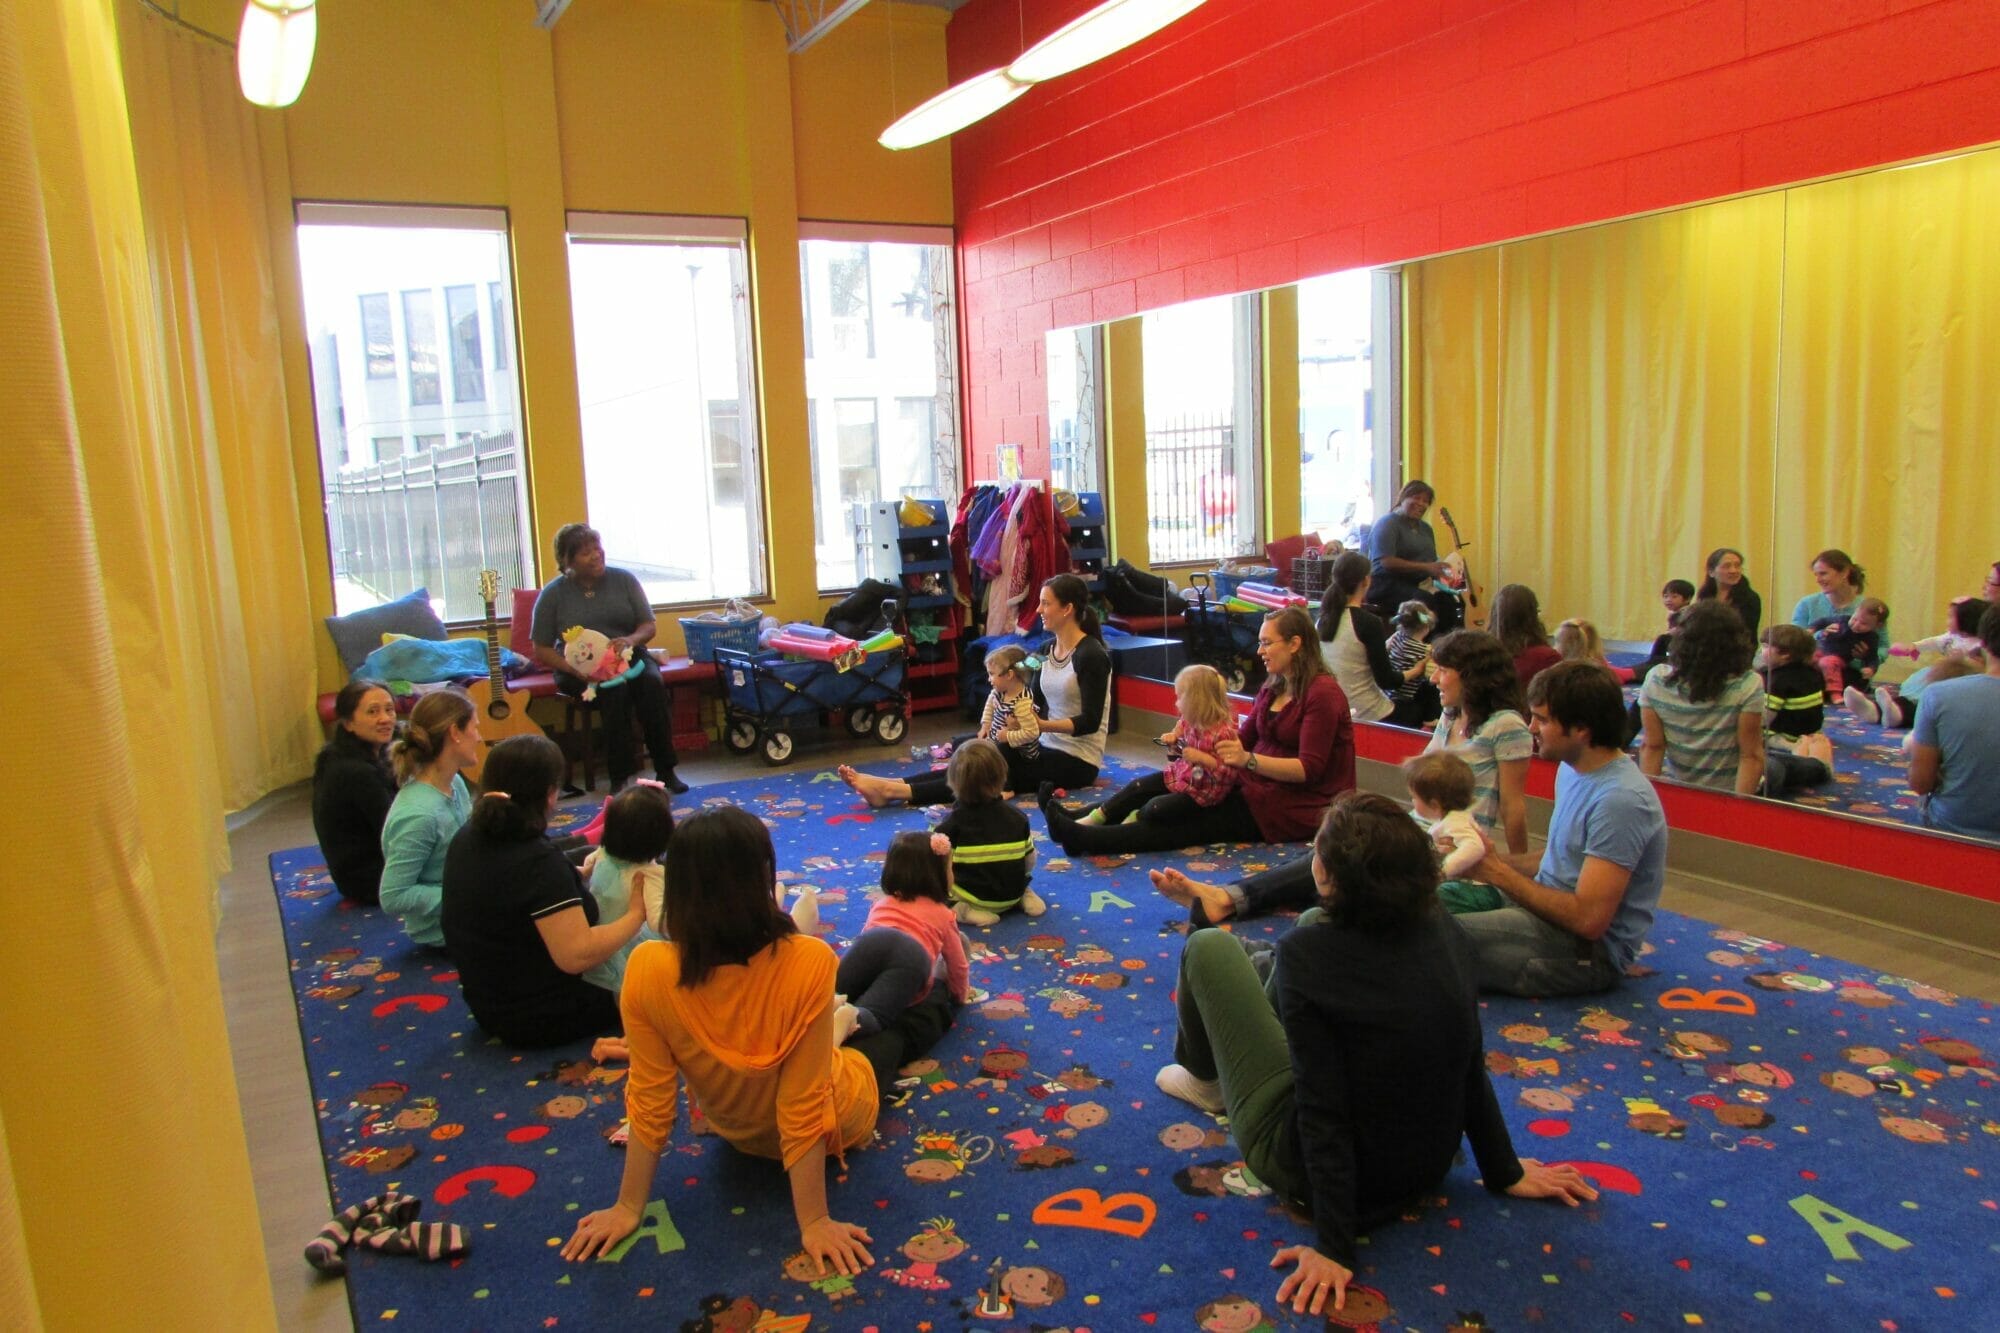 People sit in a circle with their children for an activity.